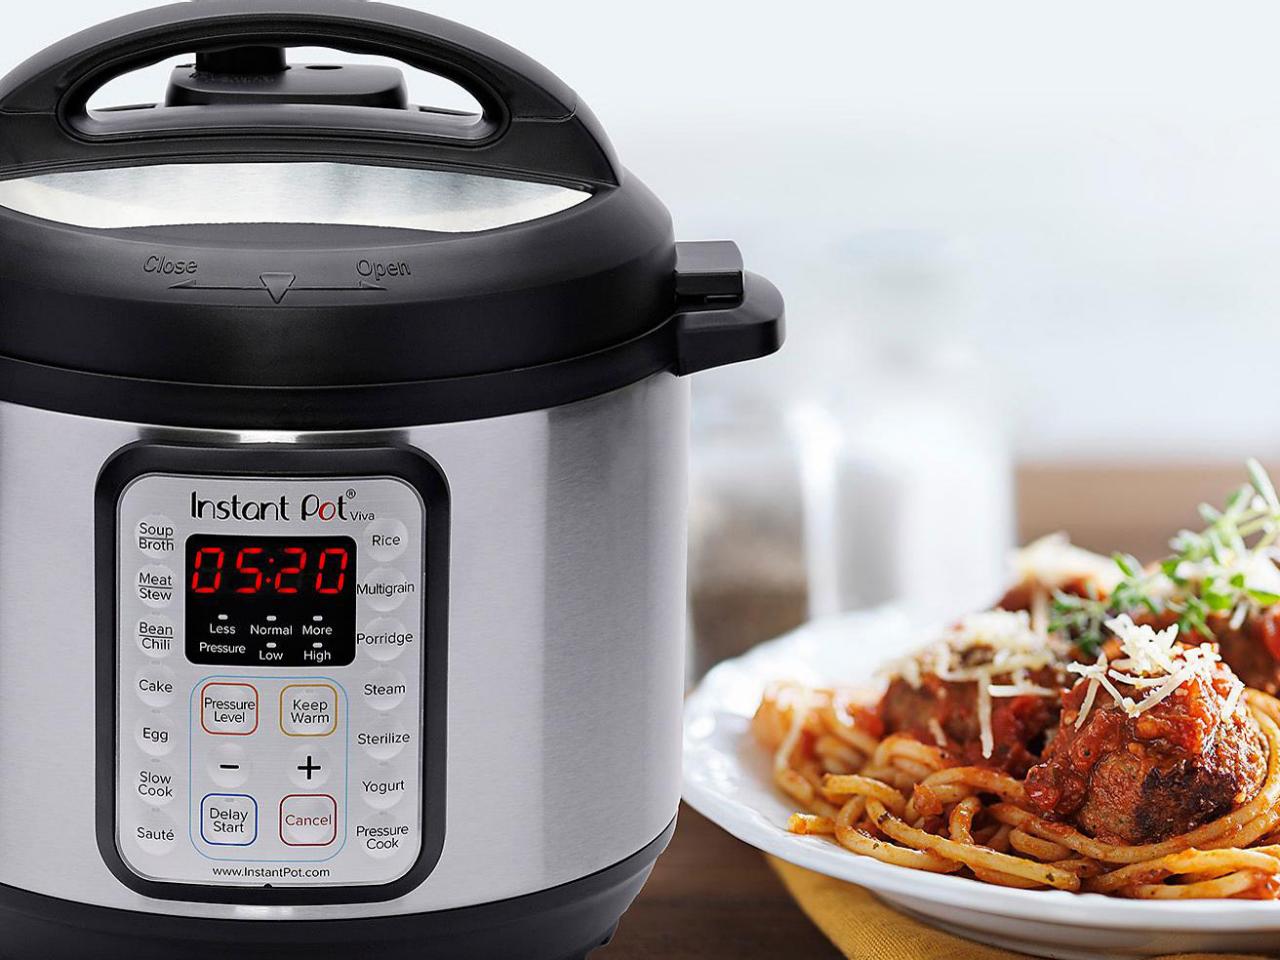 https://food.fnr.sndimg.com/content/dam/images/food/products/2019/11/8/rx_instant-pot-8-quart-viva-9-in-1-multi-use-programmable-pressure-cooker.jpeg.rend.hgtvcom.1280.960.suffix/1573230464993.jpeg